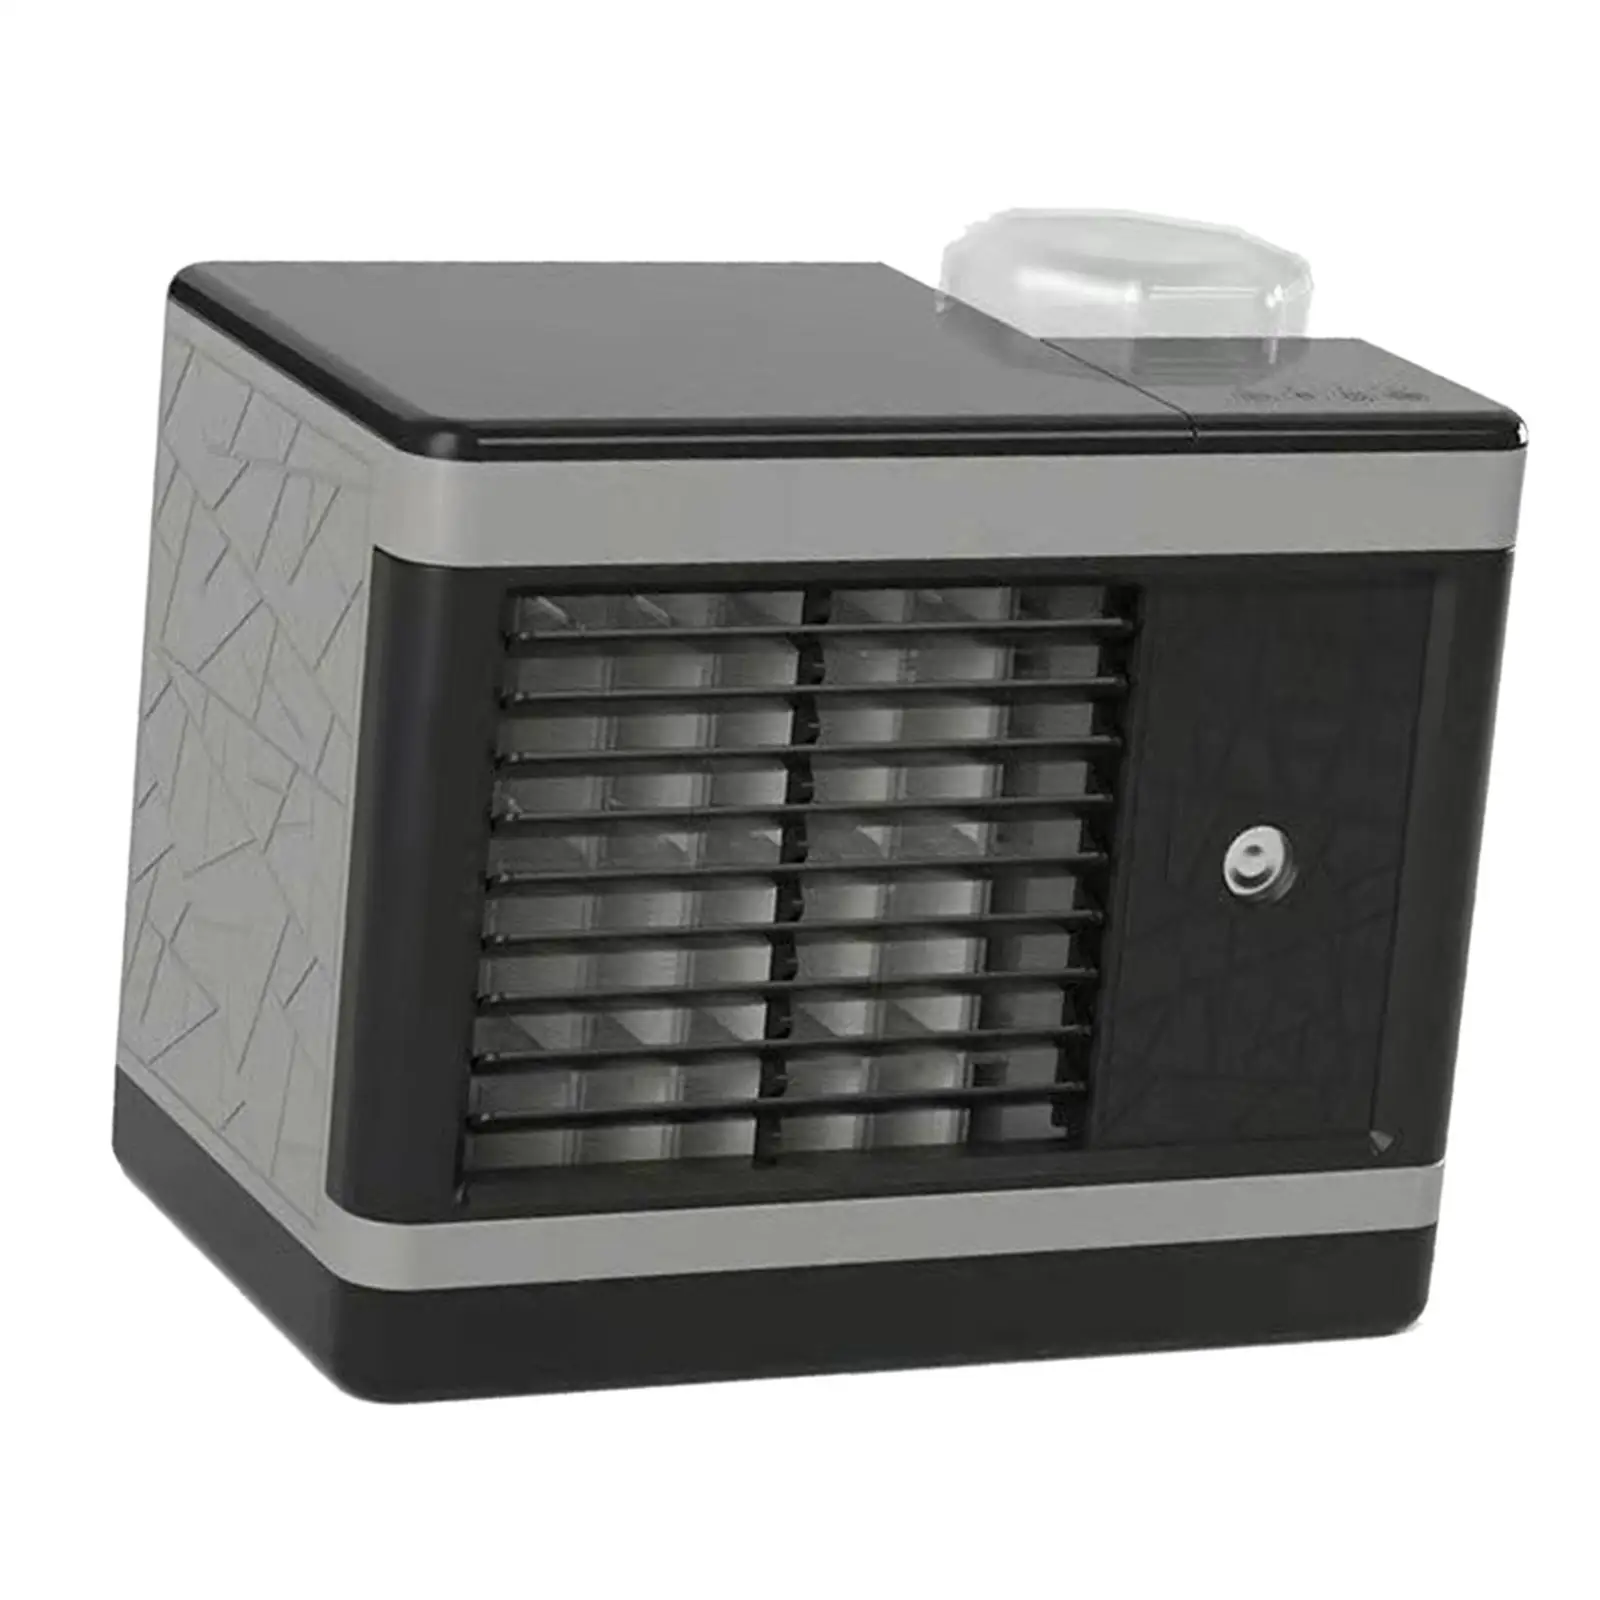 Mini Mini Air Cooler 3 Speed Fan Cooling 5V 12W Water Cooling for Desk Office Bedroom